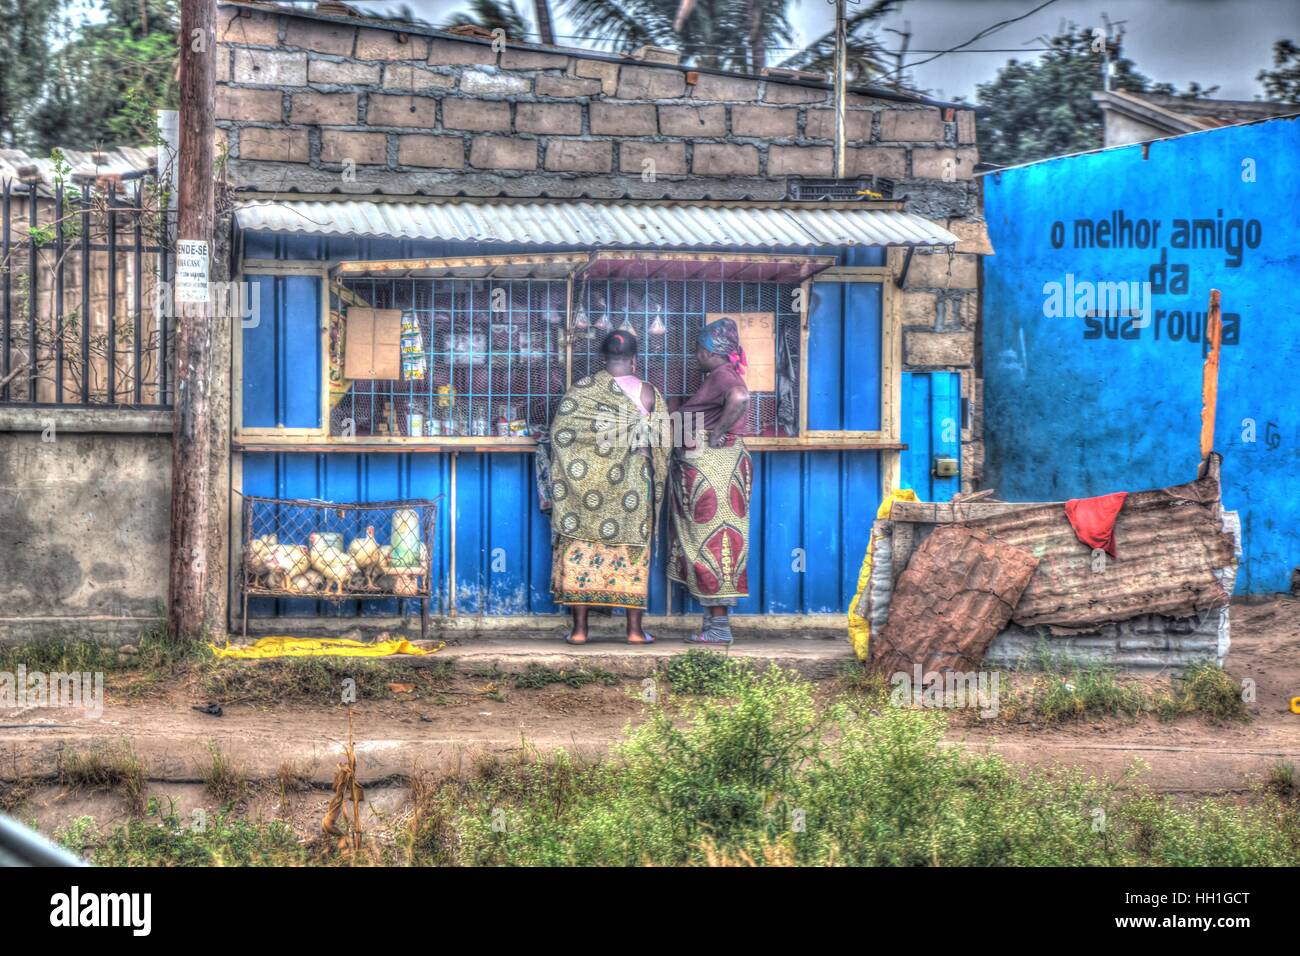 A blue general dealer shop made from tin and brick., with live caged chickens in the front and sarong cladded shoppers. Stock Photo